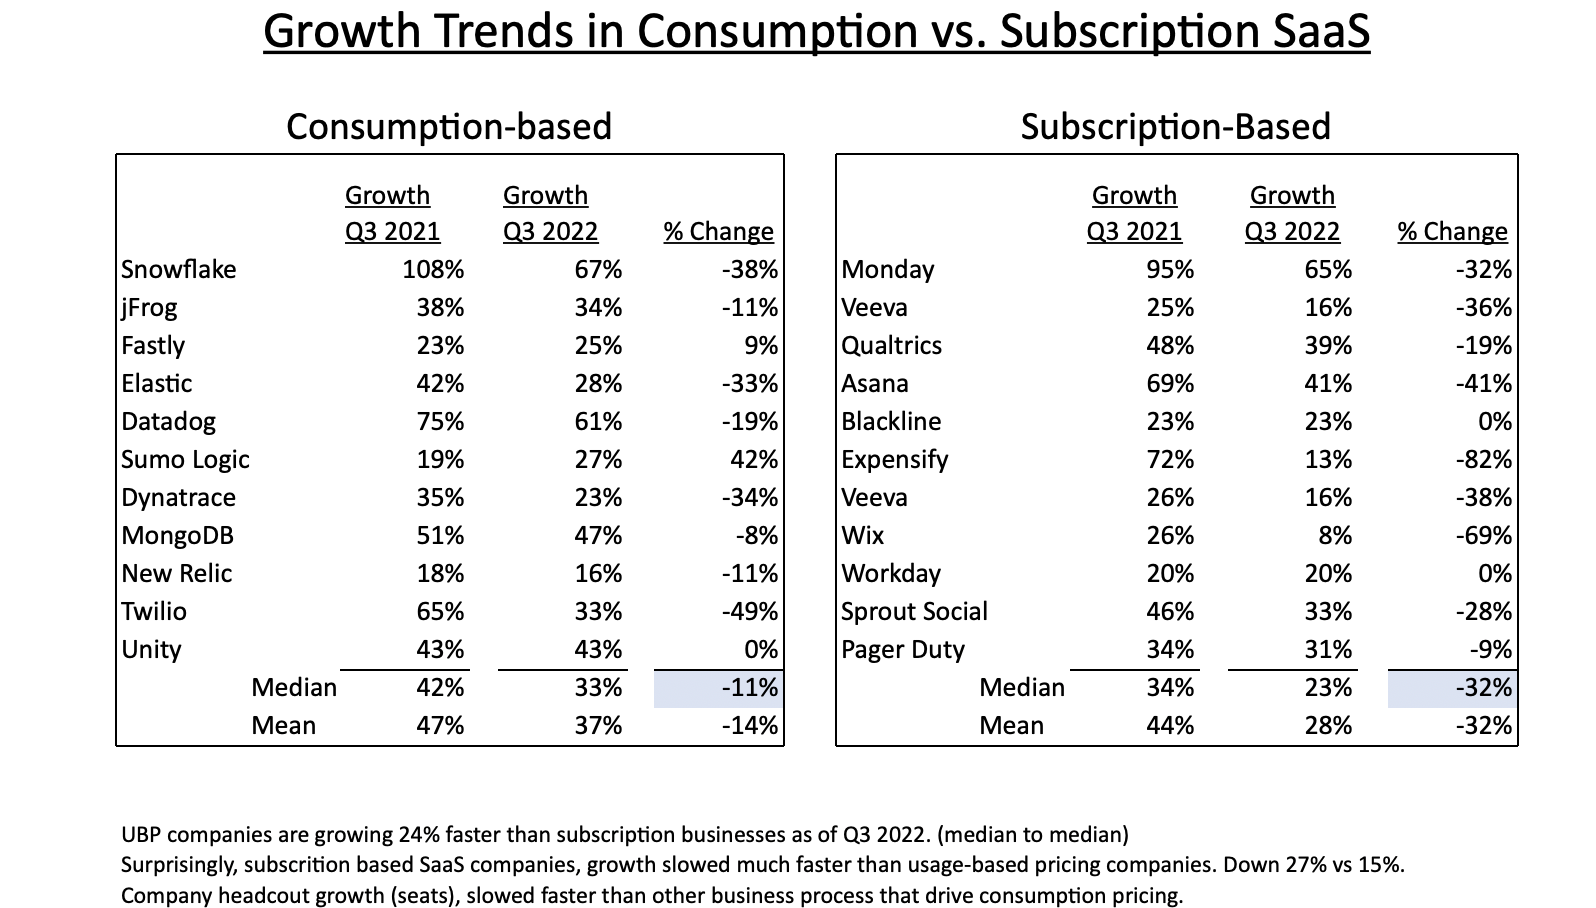 Table of Growth Trends in Consumption vs Subscription SaaS